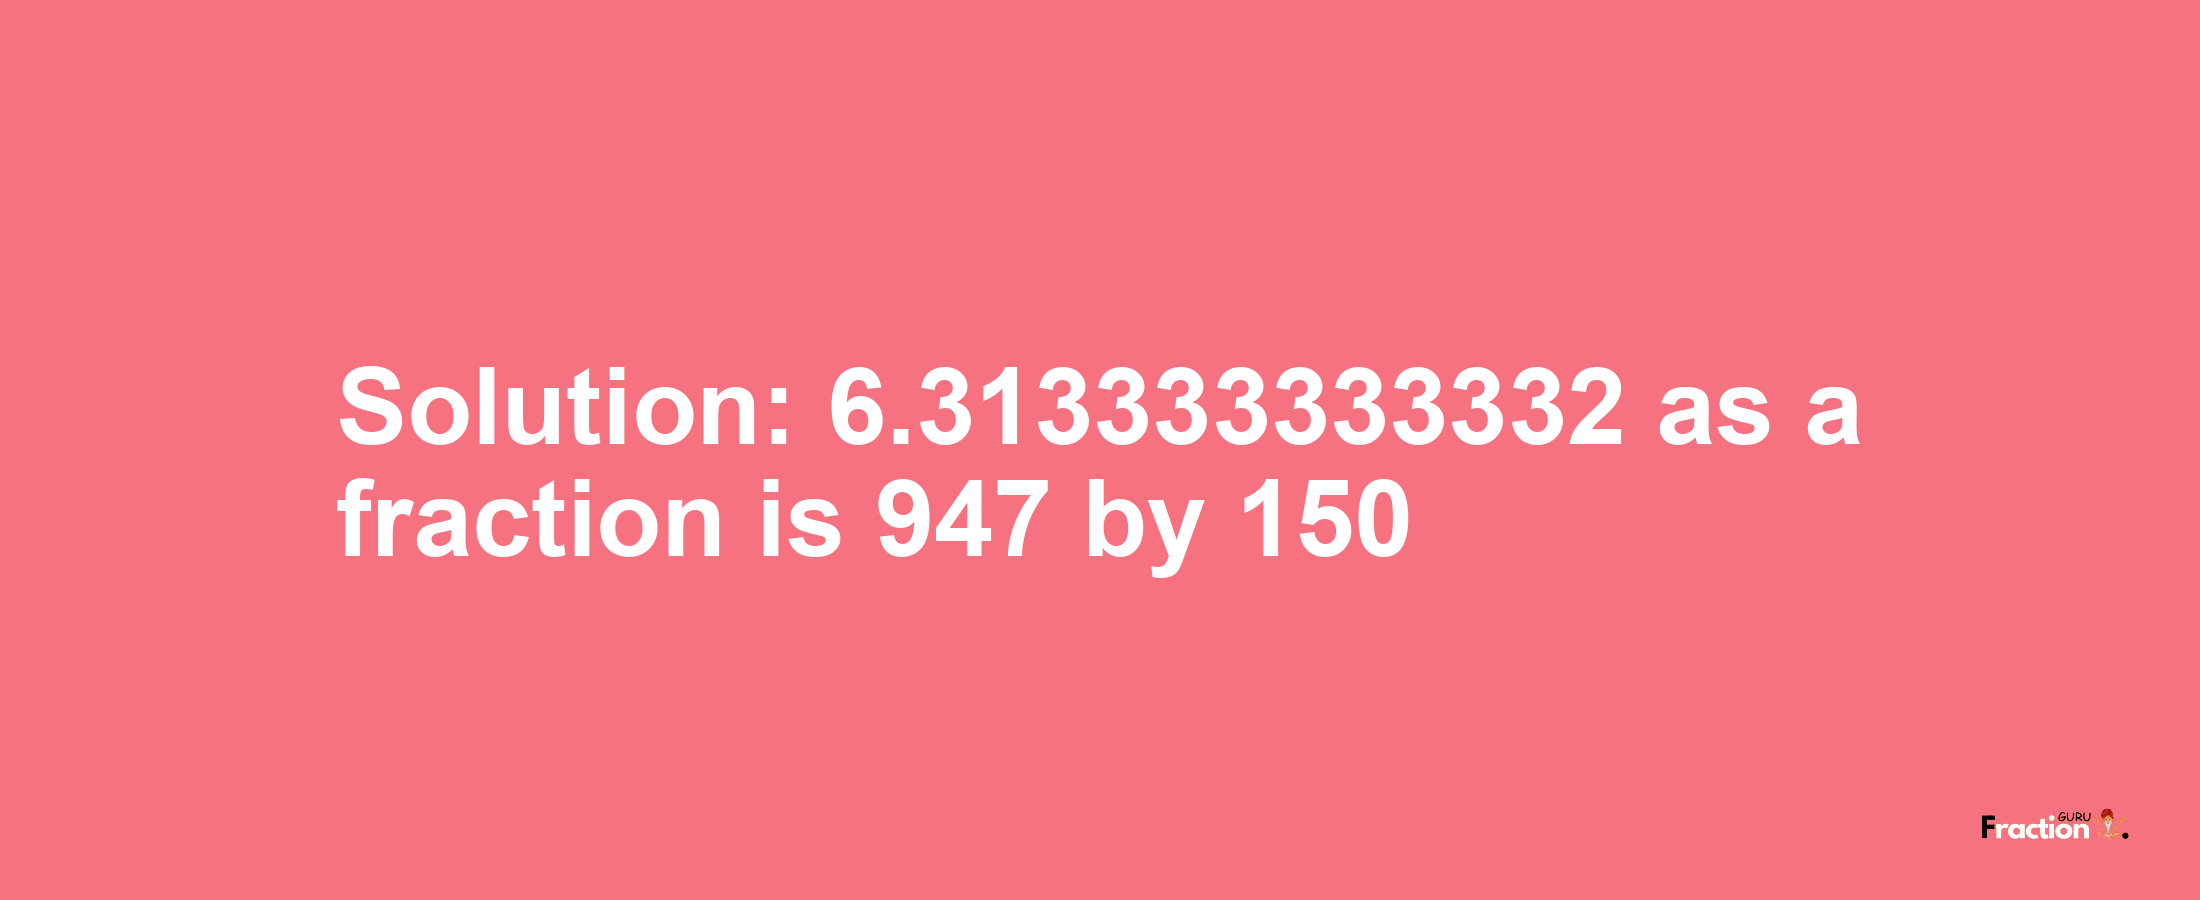 Solution:6.313333333332 as a fraction is 947/150